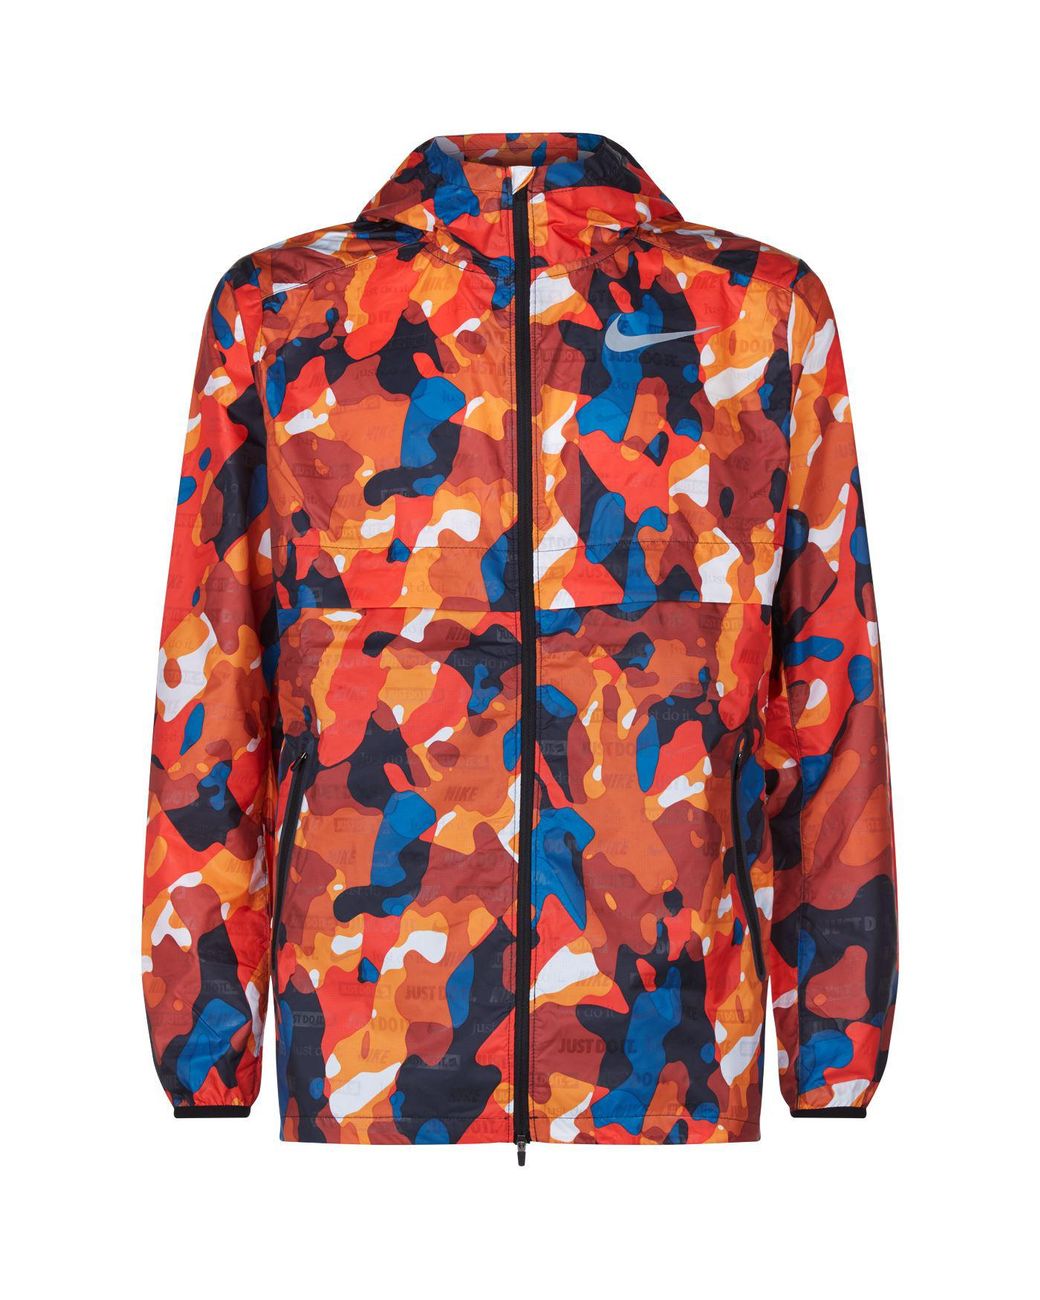 Nike Shield Ghost Flash Jacket for Lyst UK